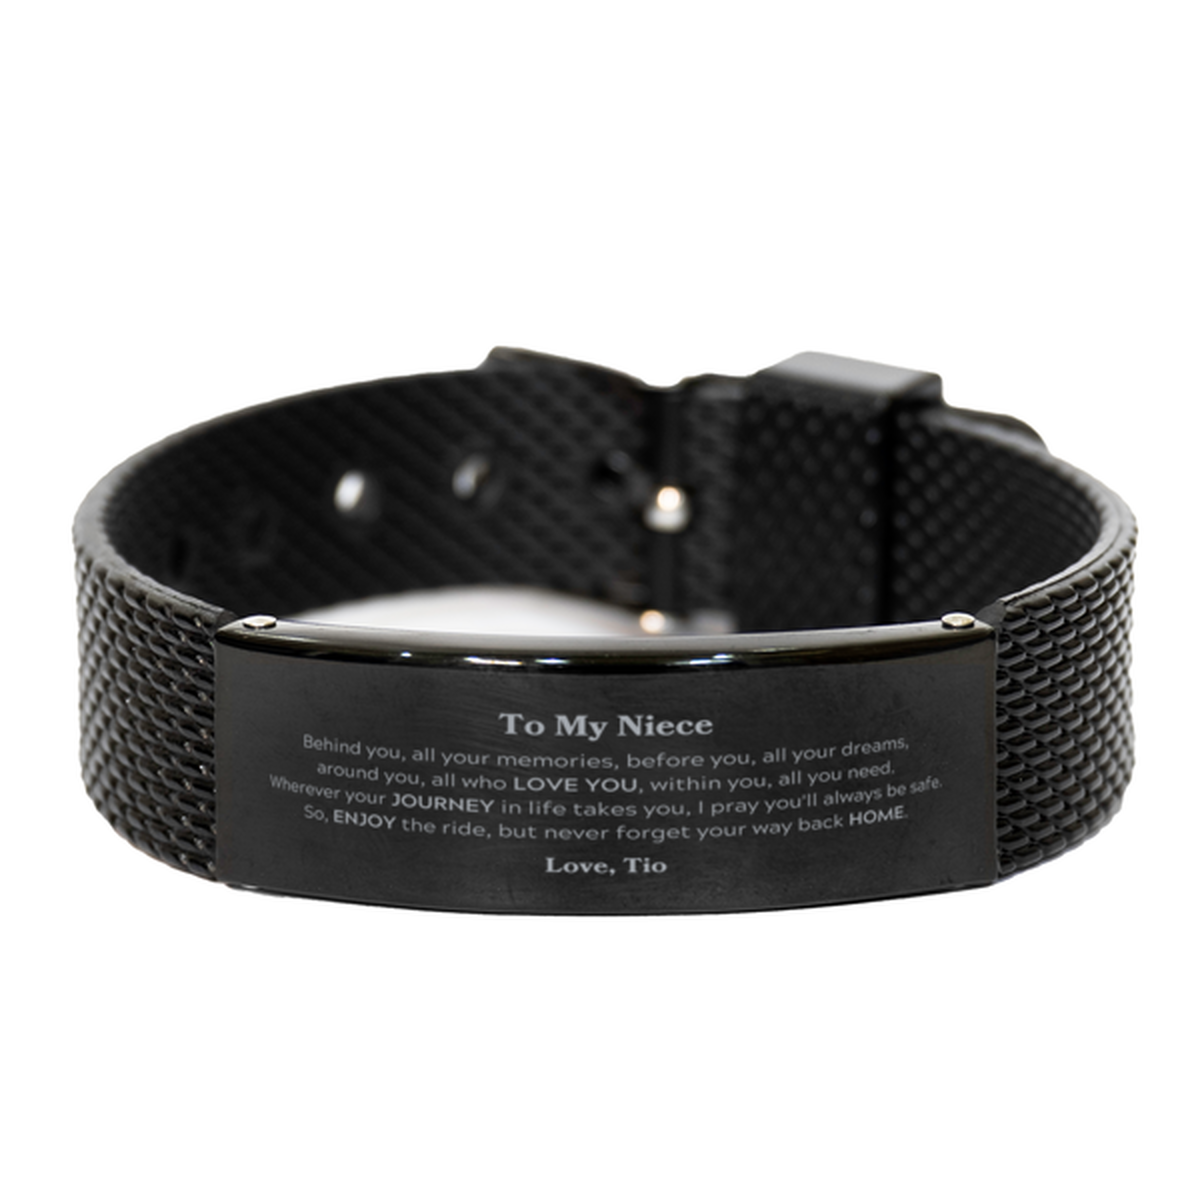 To My Niece Graduation Gifts from Tio, Niece Black Shark Mesh Bracelet Christmas Birthday Gifts for Niece Behind you, all your memories, before you, all your dreams. Love, Tio